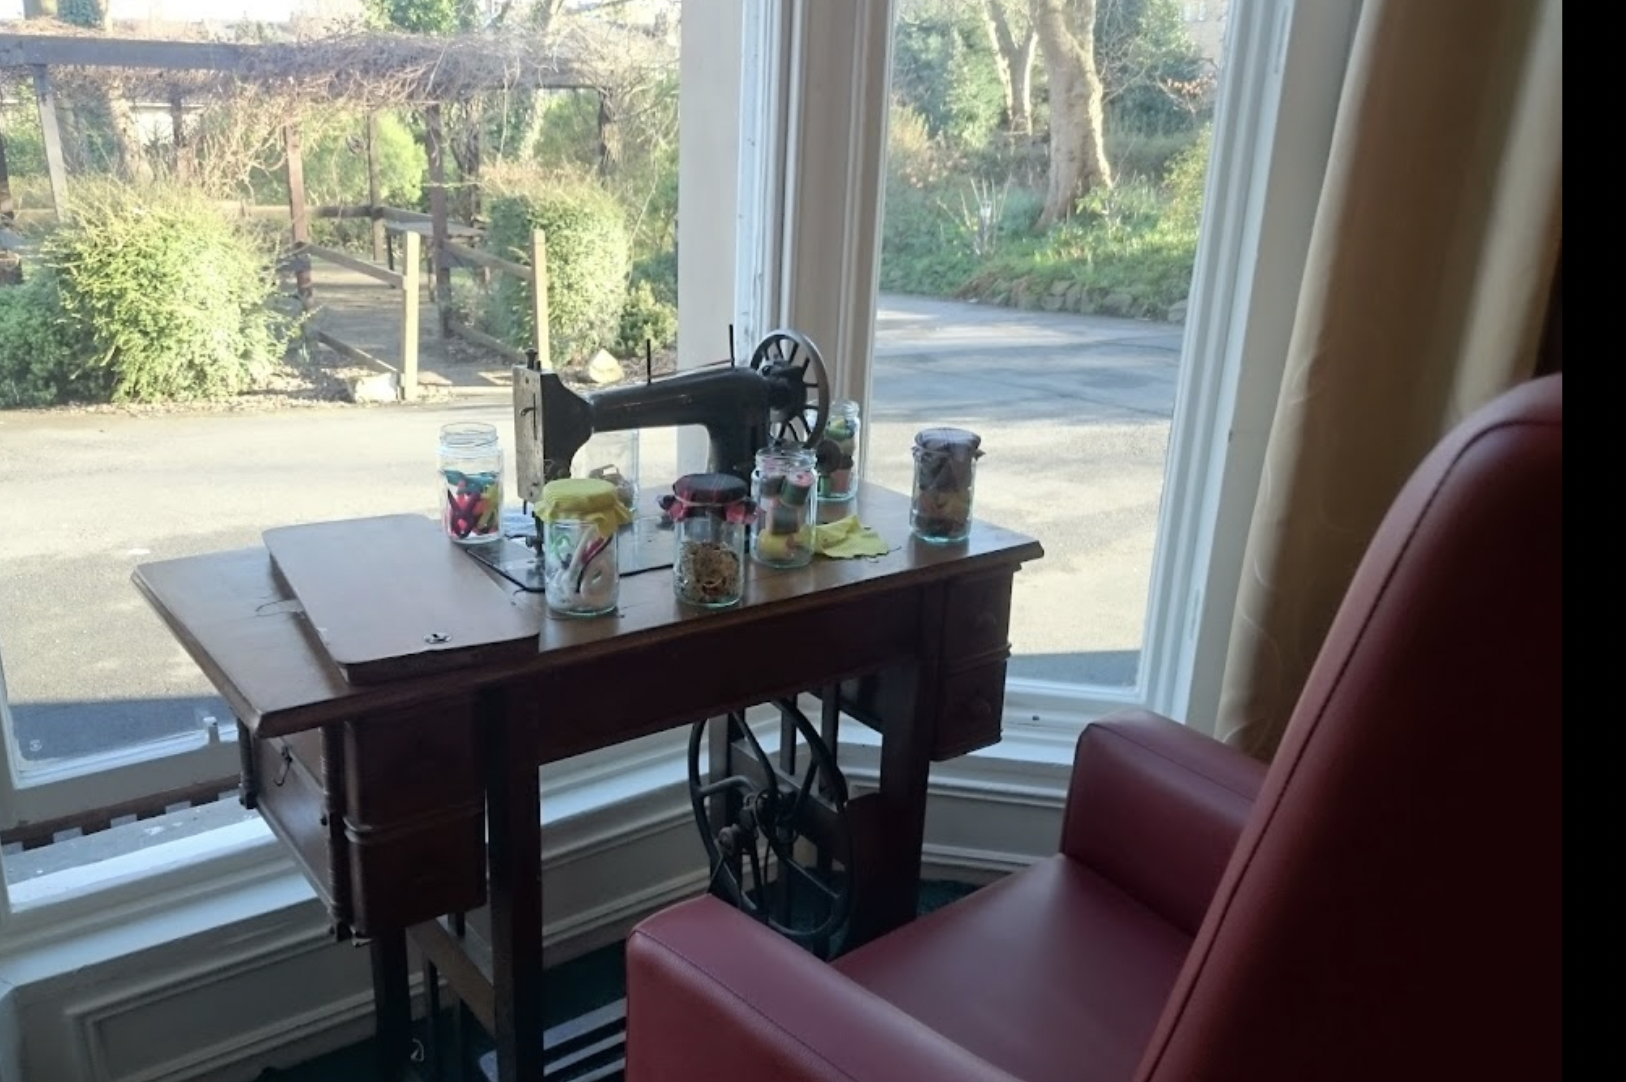 Window seat of Cleveland House care home in Huddersfield, West Yorkshire